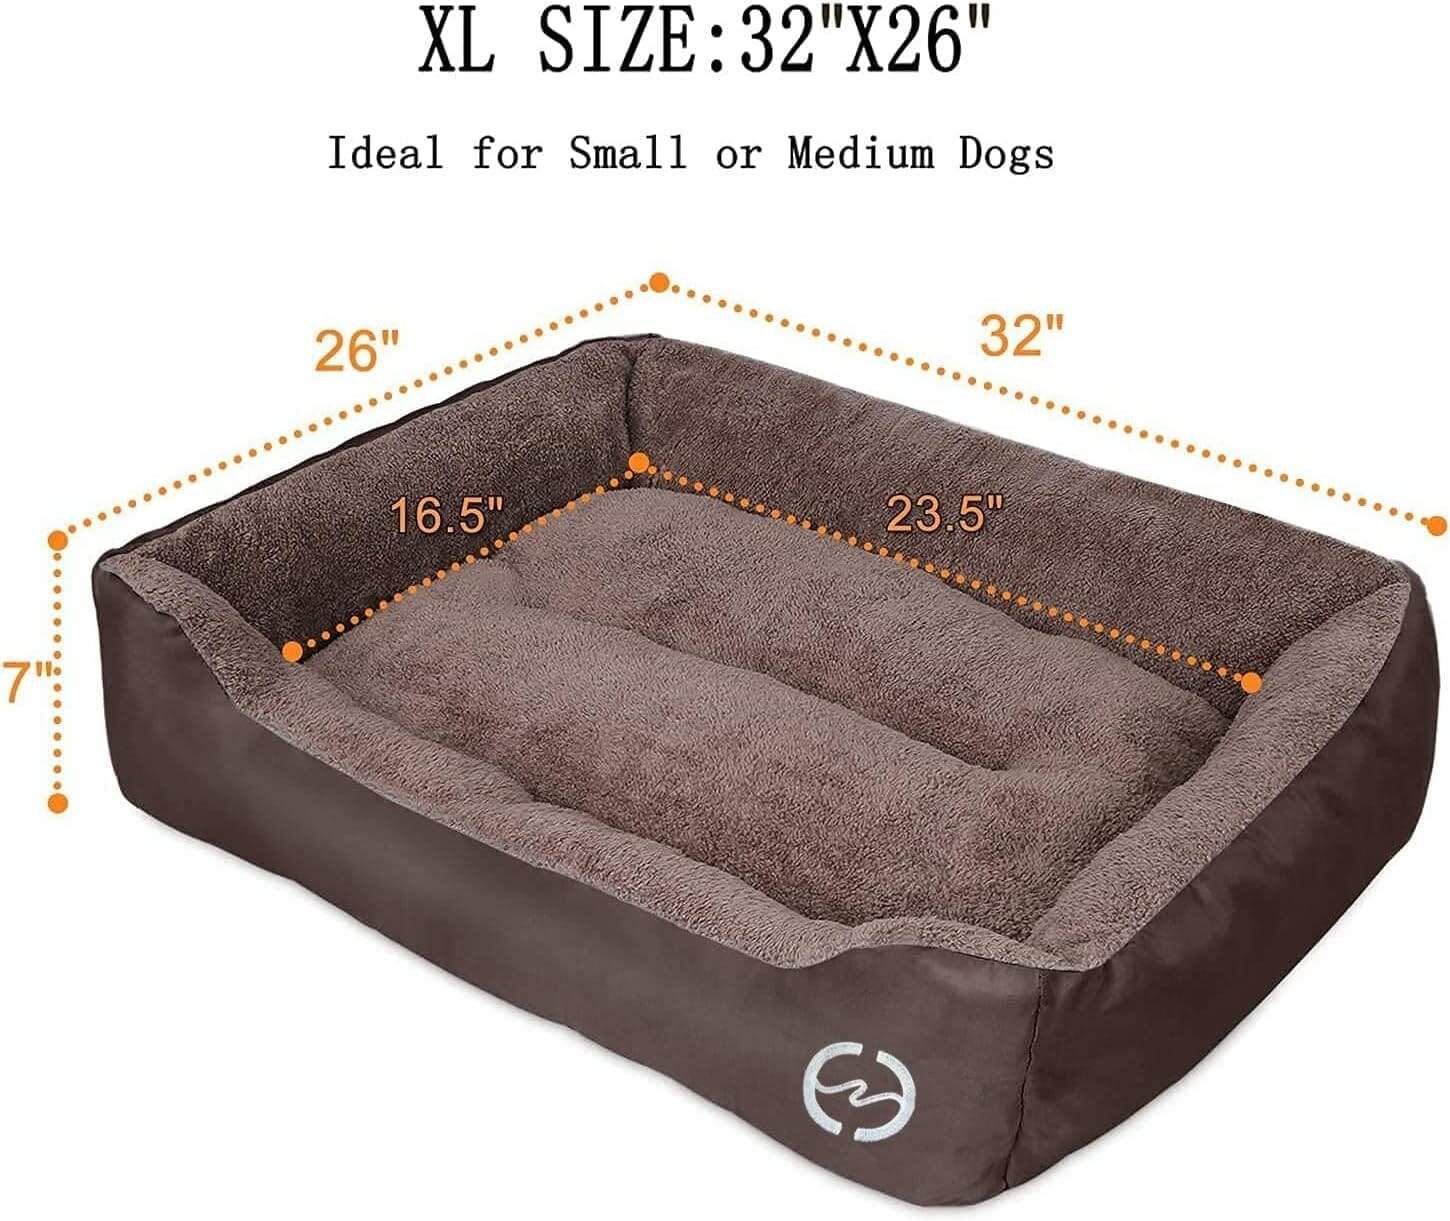 CLOUDZONE Dog Bed Review – The Perfect Comfort for Your Pup?